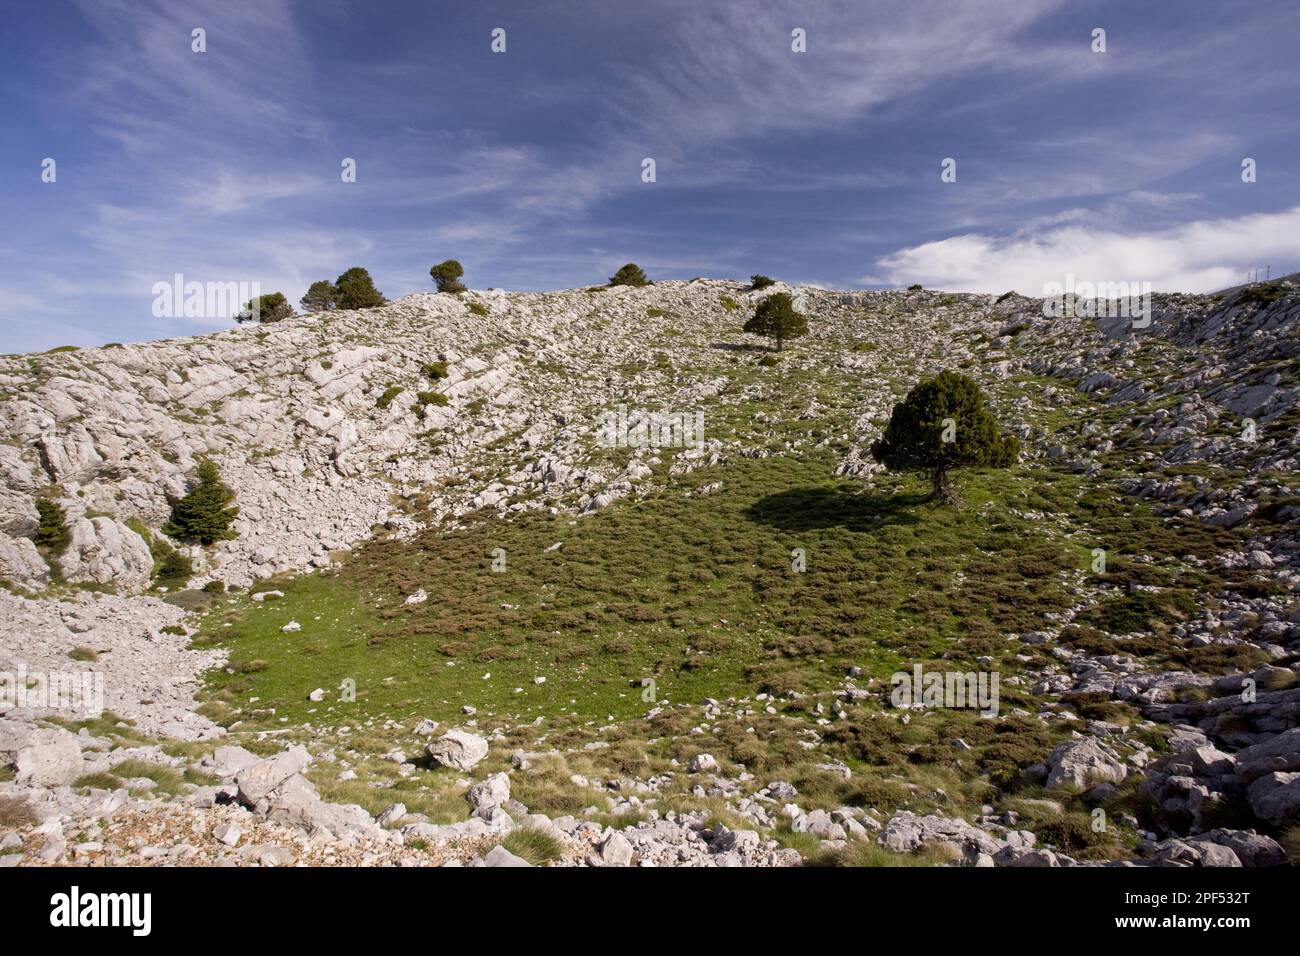 View of karstic limestone habitat, with trees of Greek greek fir (Abies cephalonica), at about 1700m, Mount Parnassus N. P. Greece Stock Photo